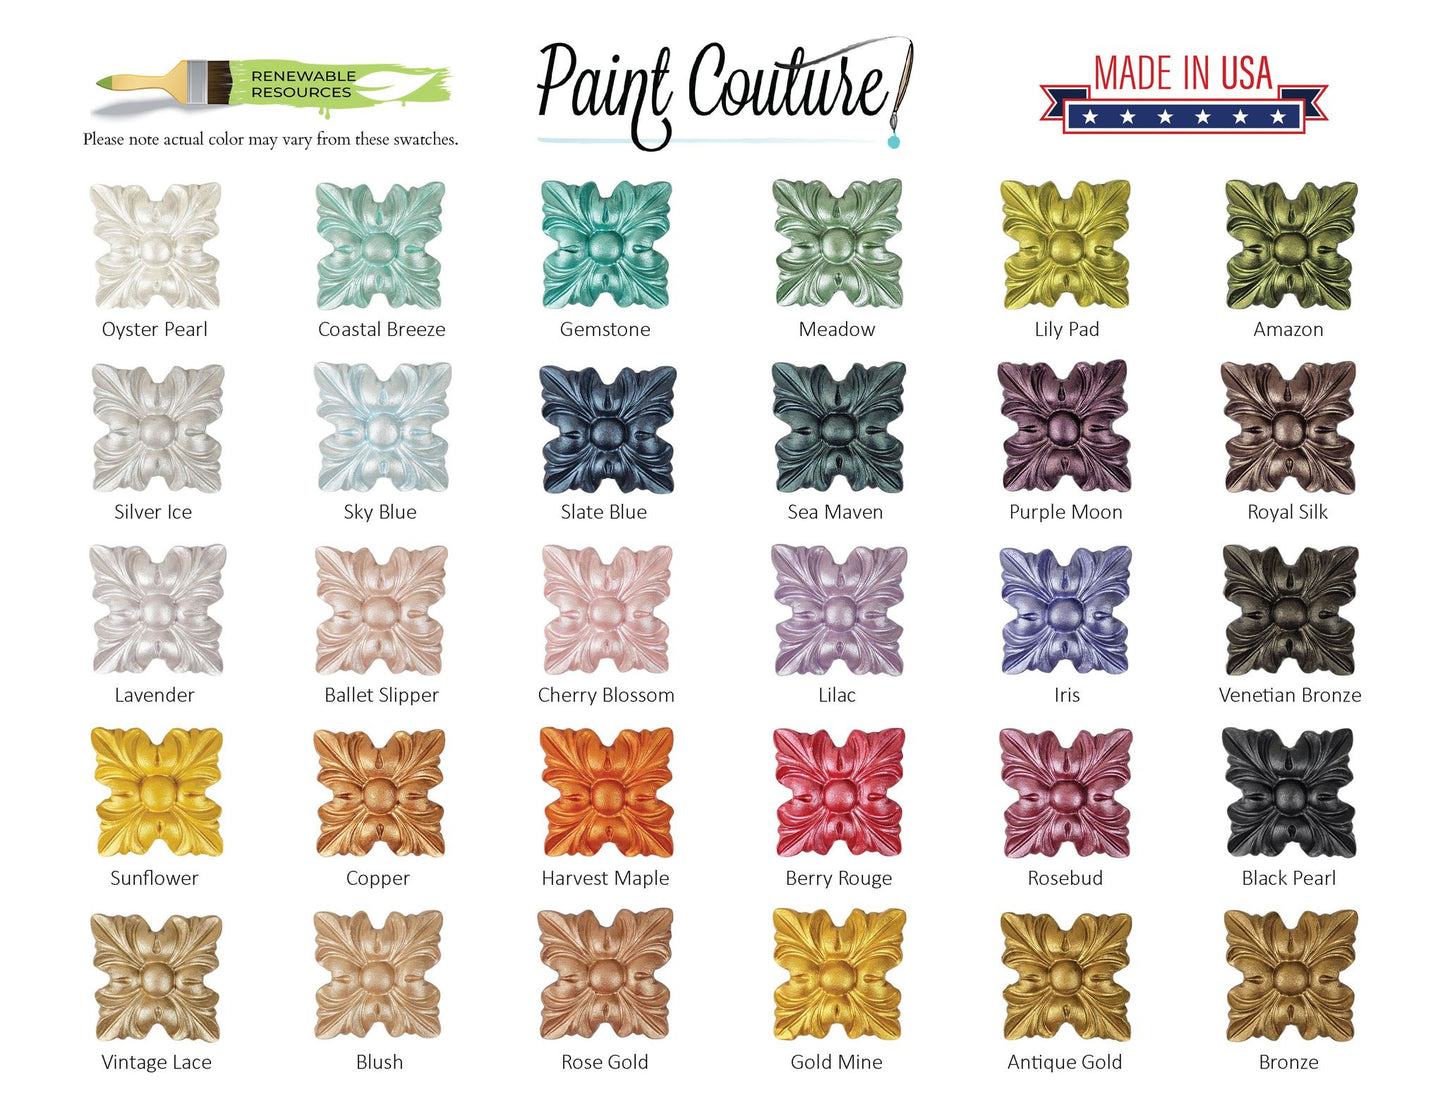 Paint Couture Metallic Paint - Oyster Pearl